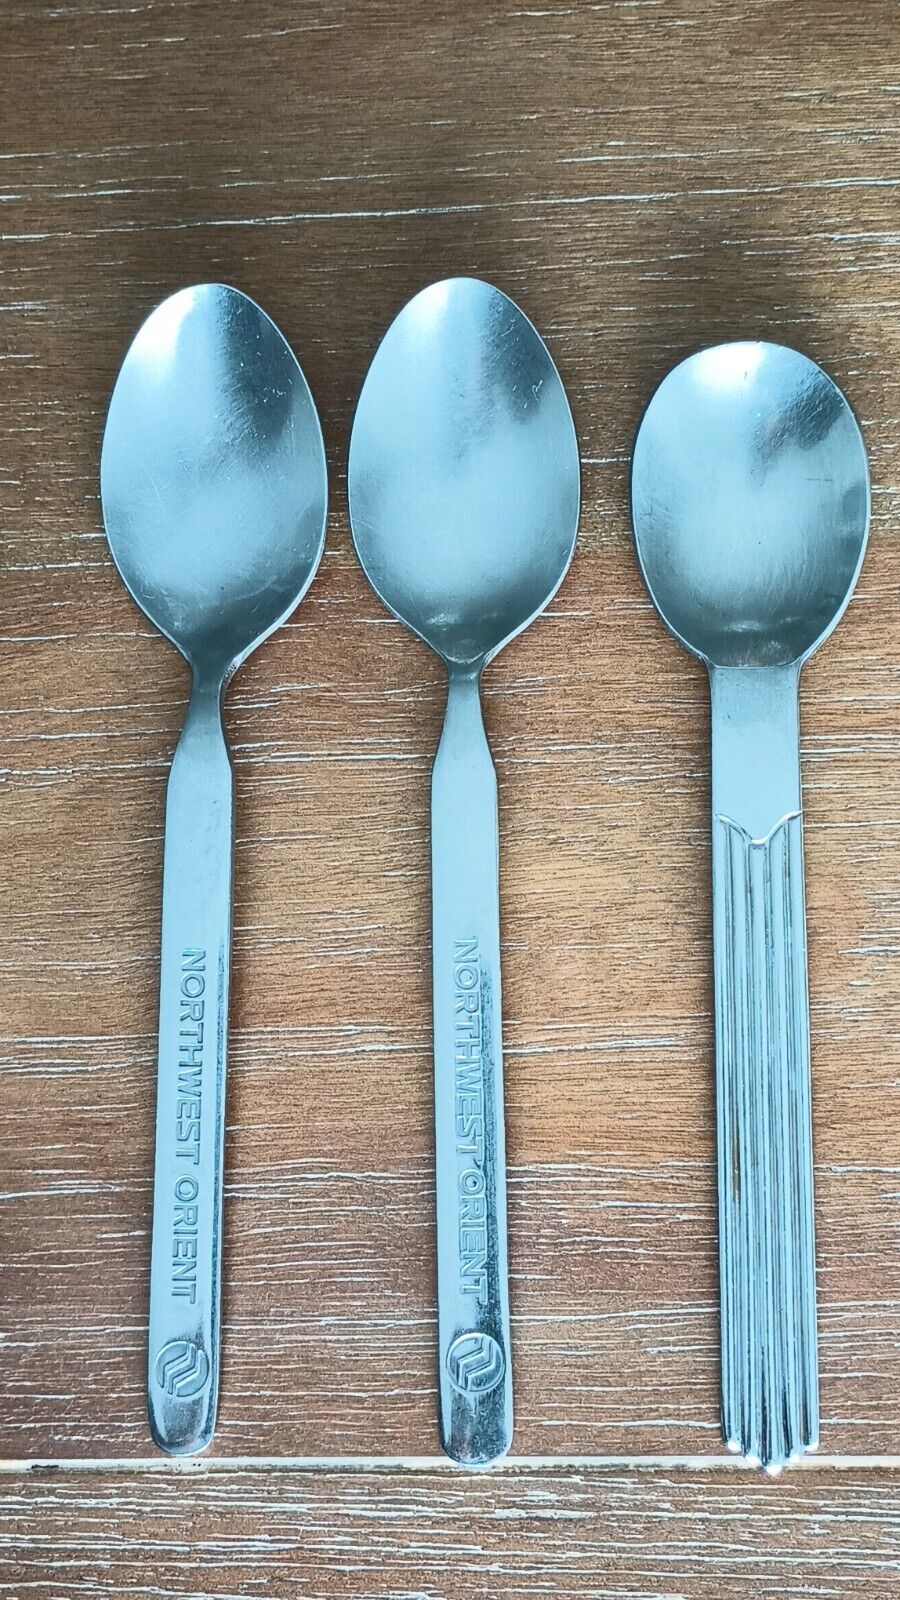 Northwest Orient Airlines Stainless Silverware Spoons Lot of 2 with Cambridge 